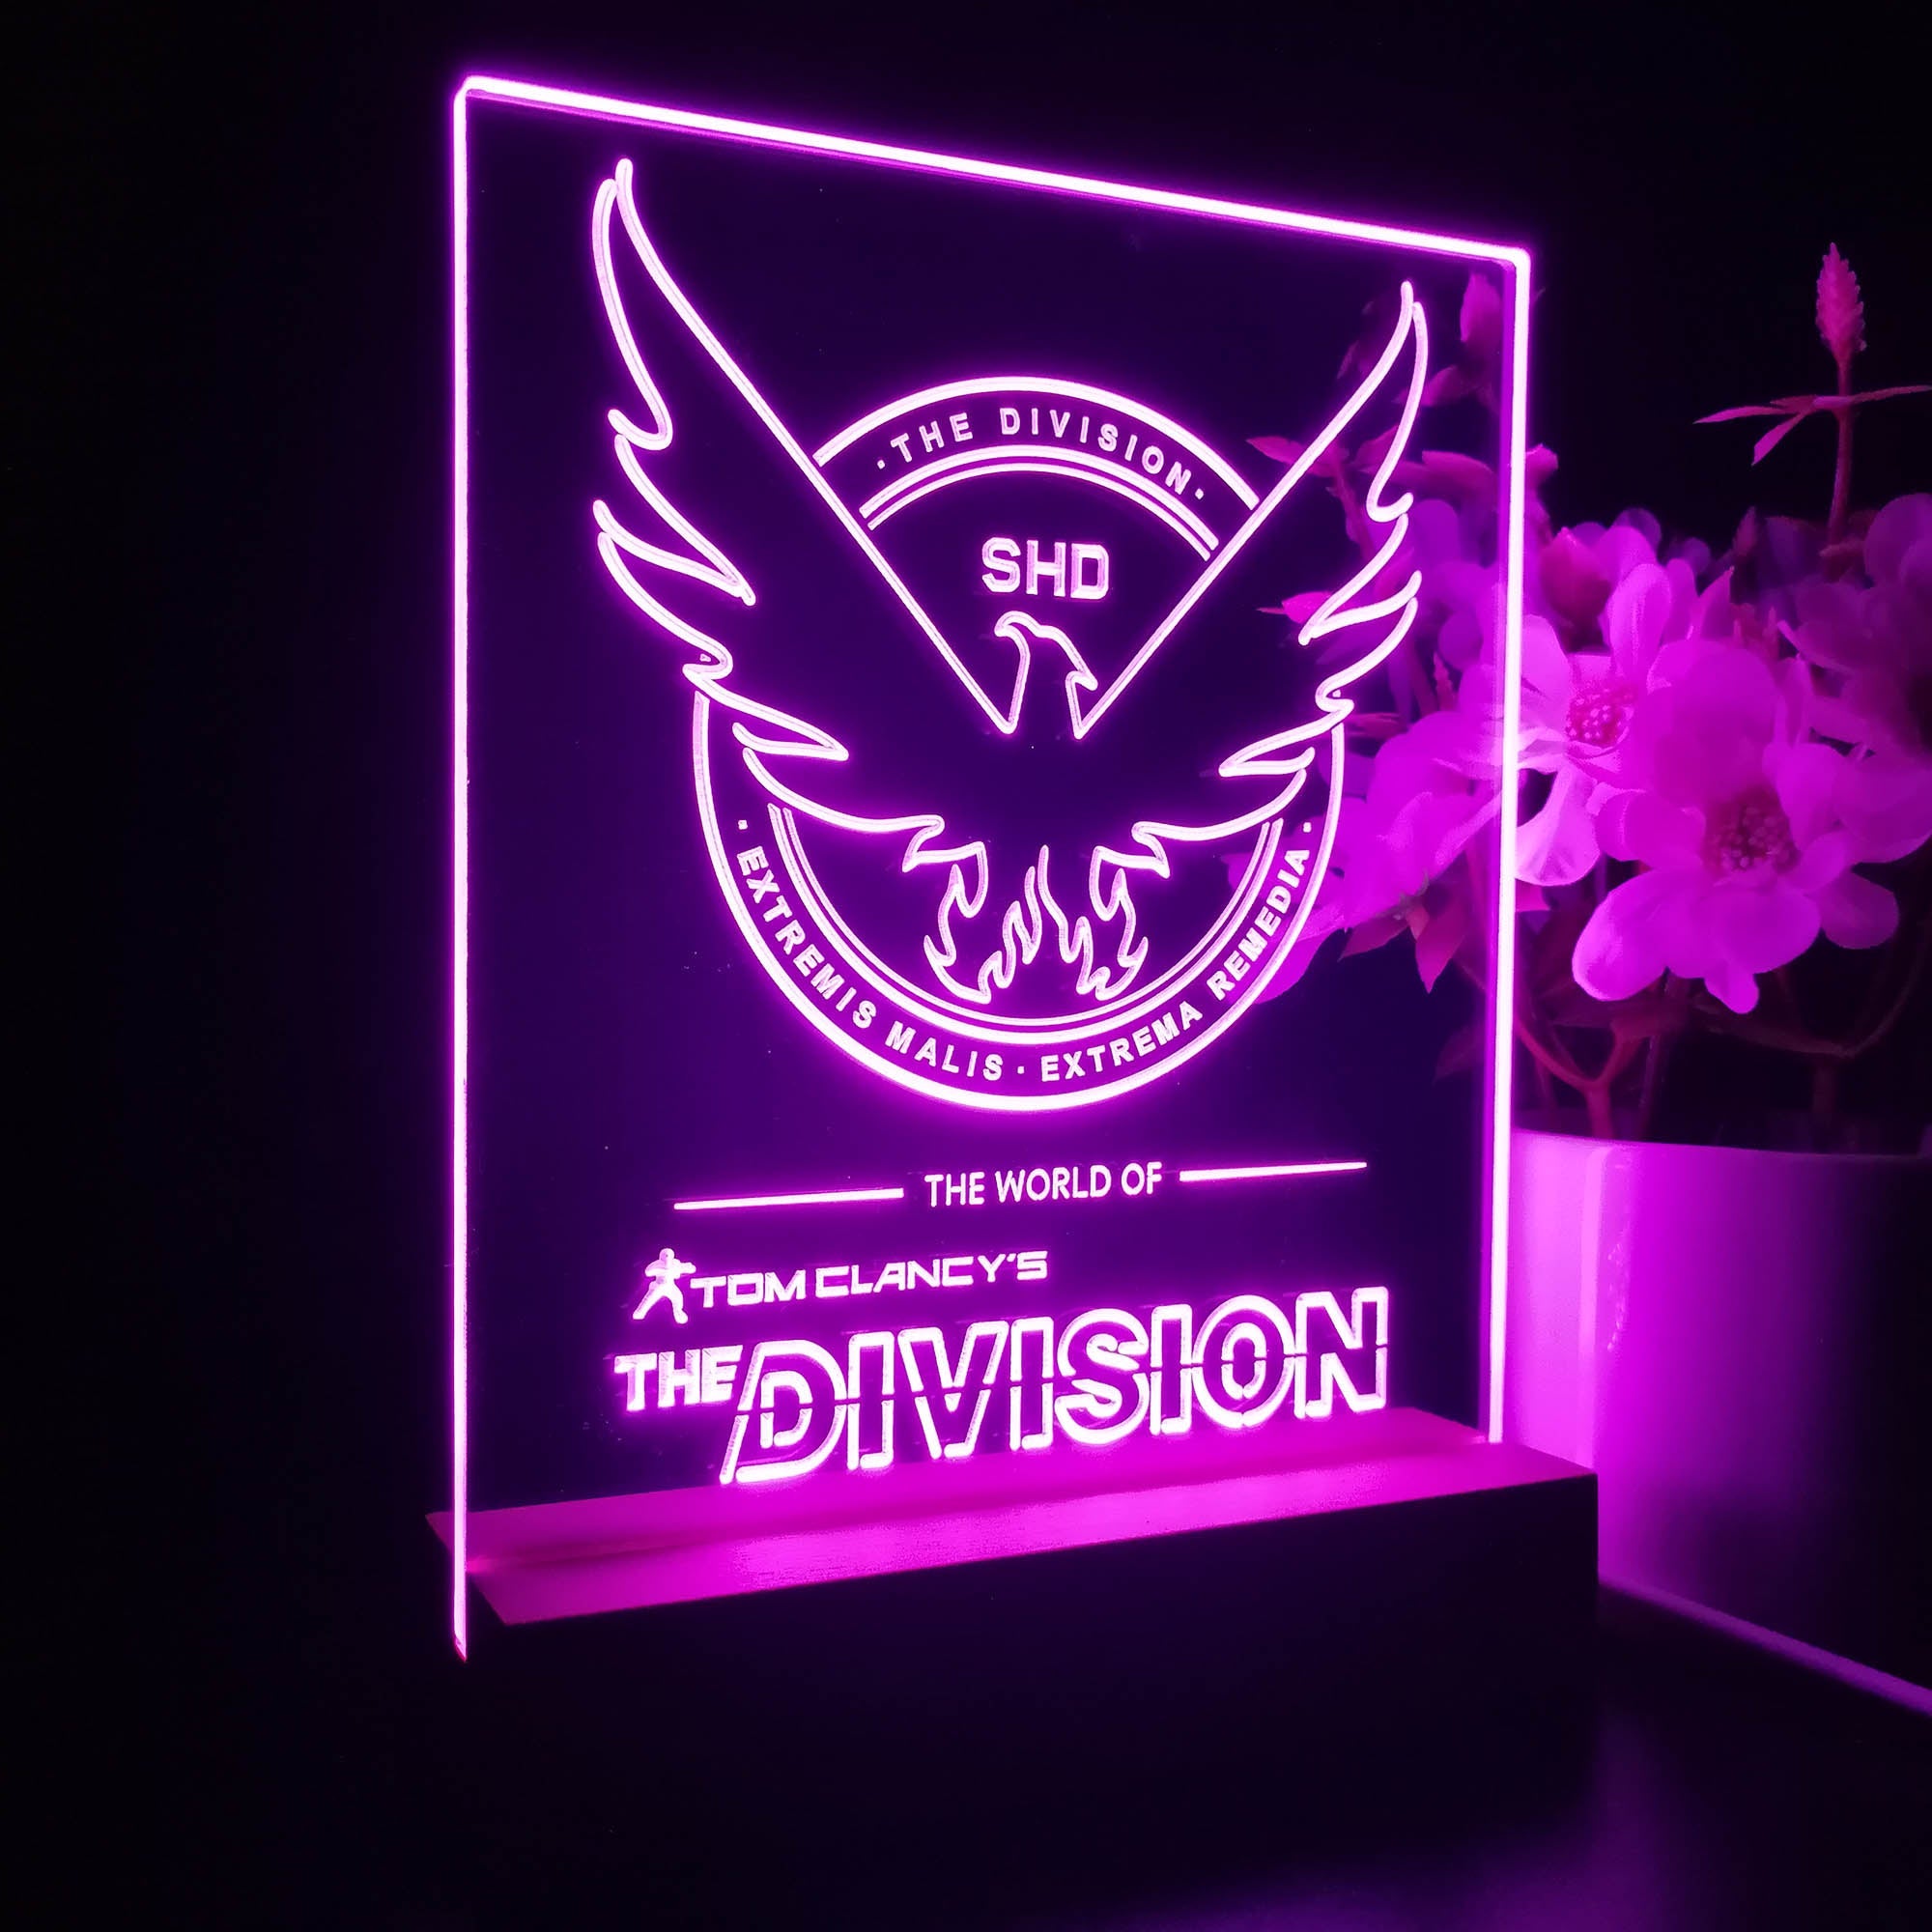 Tom Clancy's Division Game Room LED Sign Lamp Display